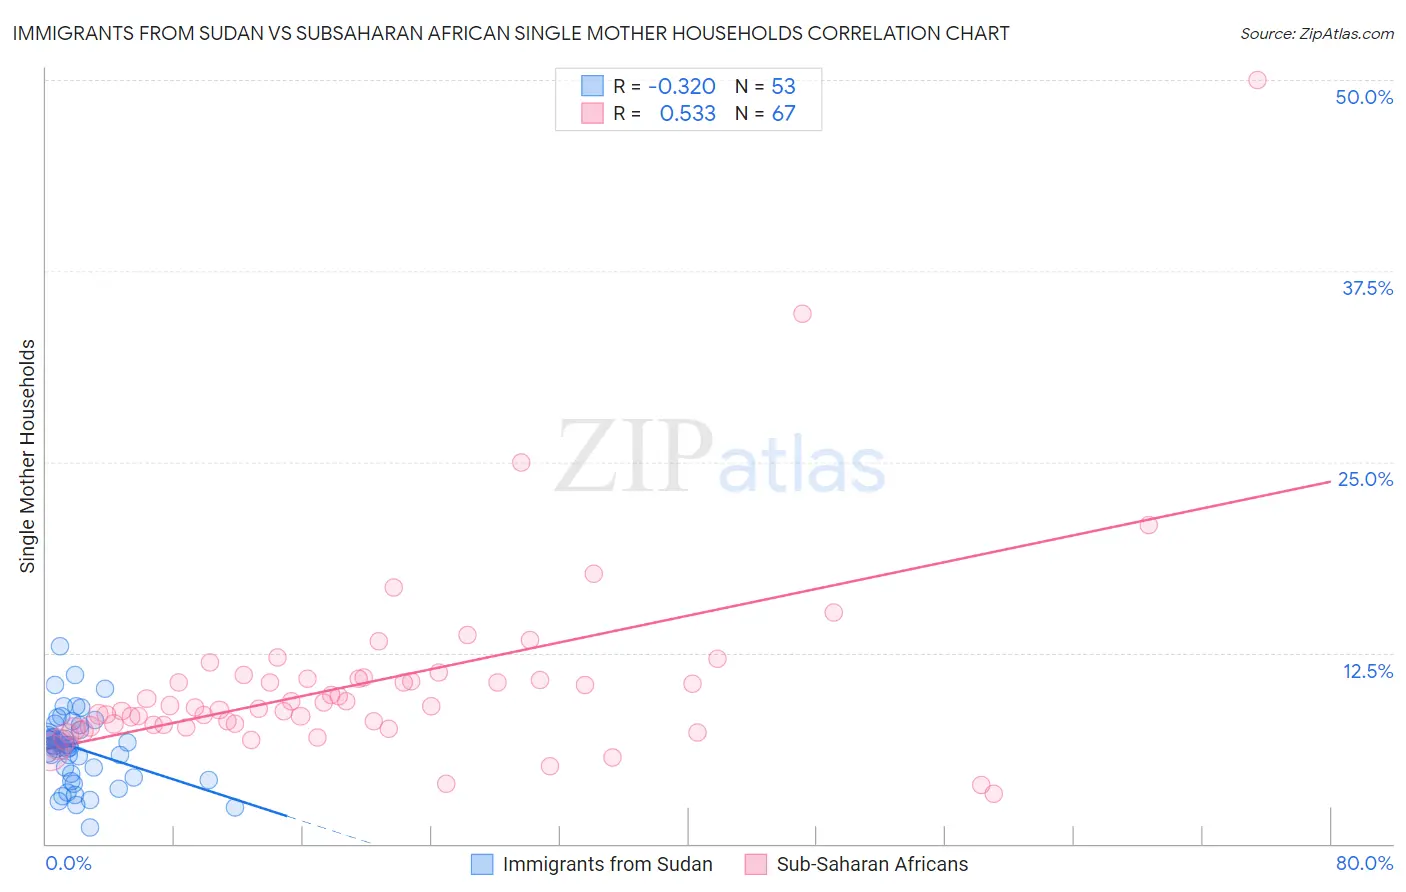 Immigrants from Sudan vs Subsaharan African Single Mother Households